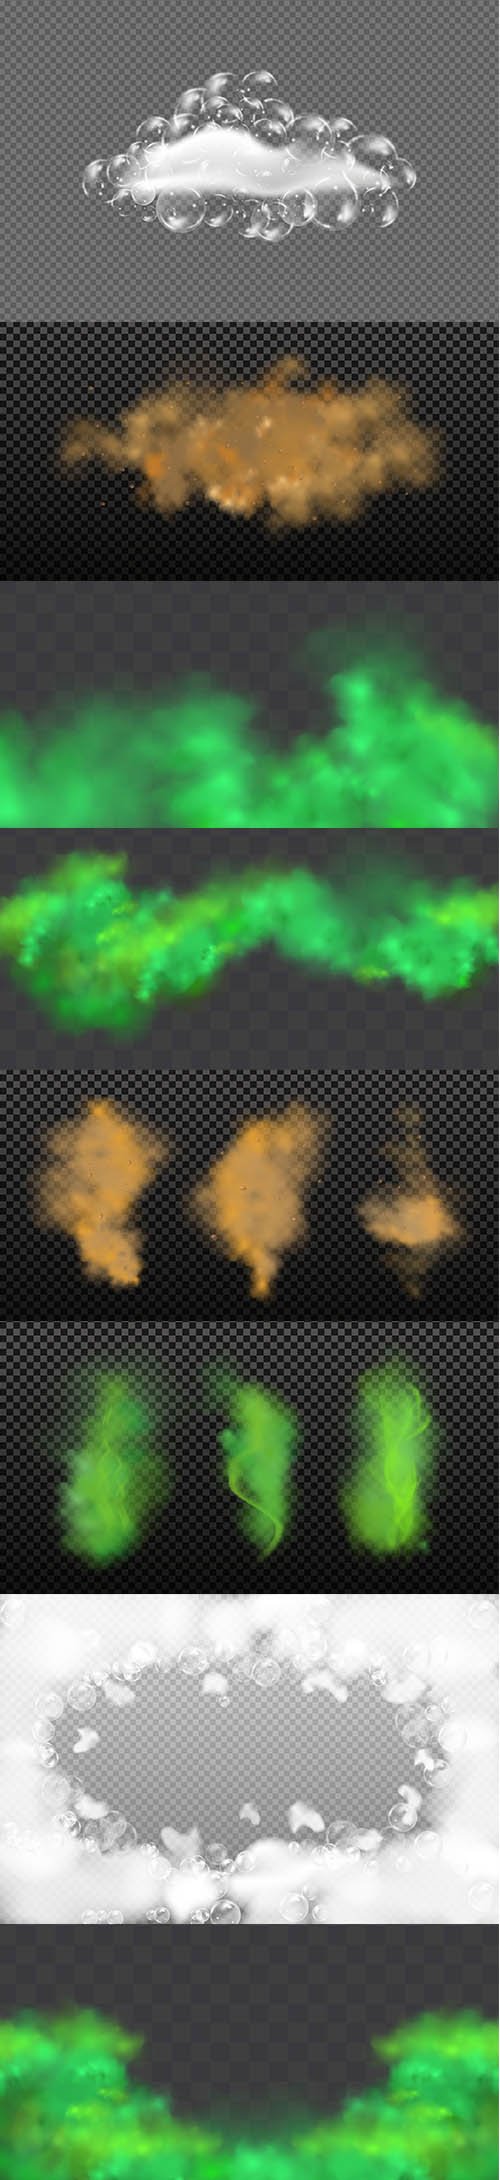 Smoke or Poison Gases,chemical toxic vapour Vector realistic set